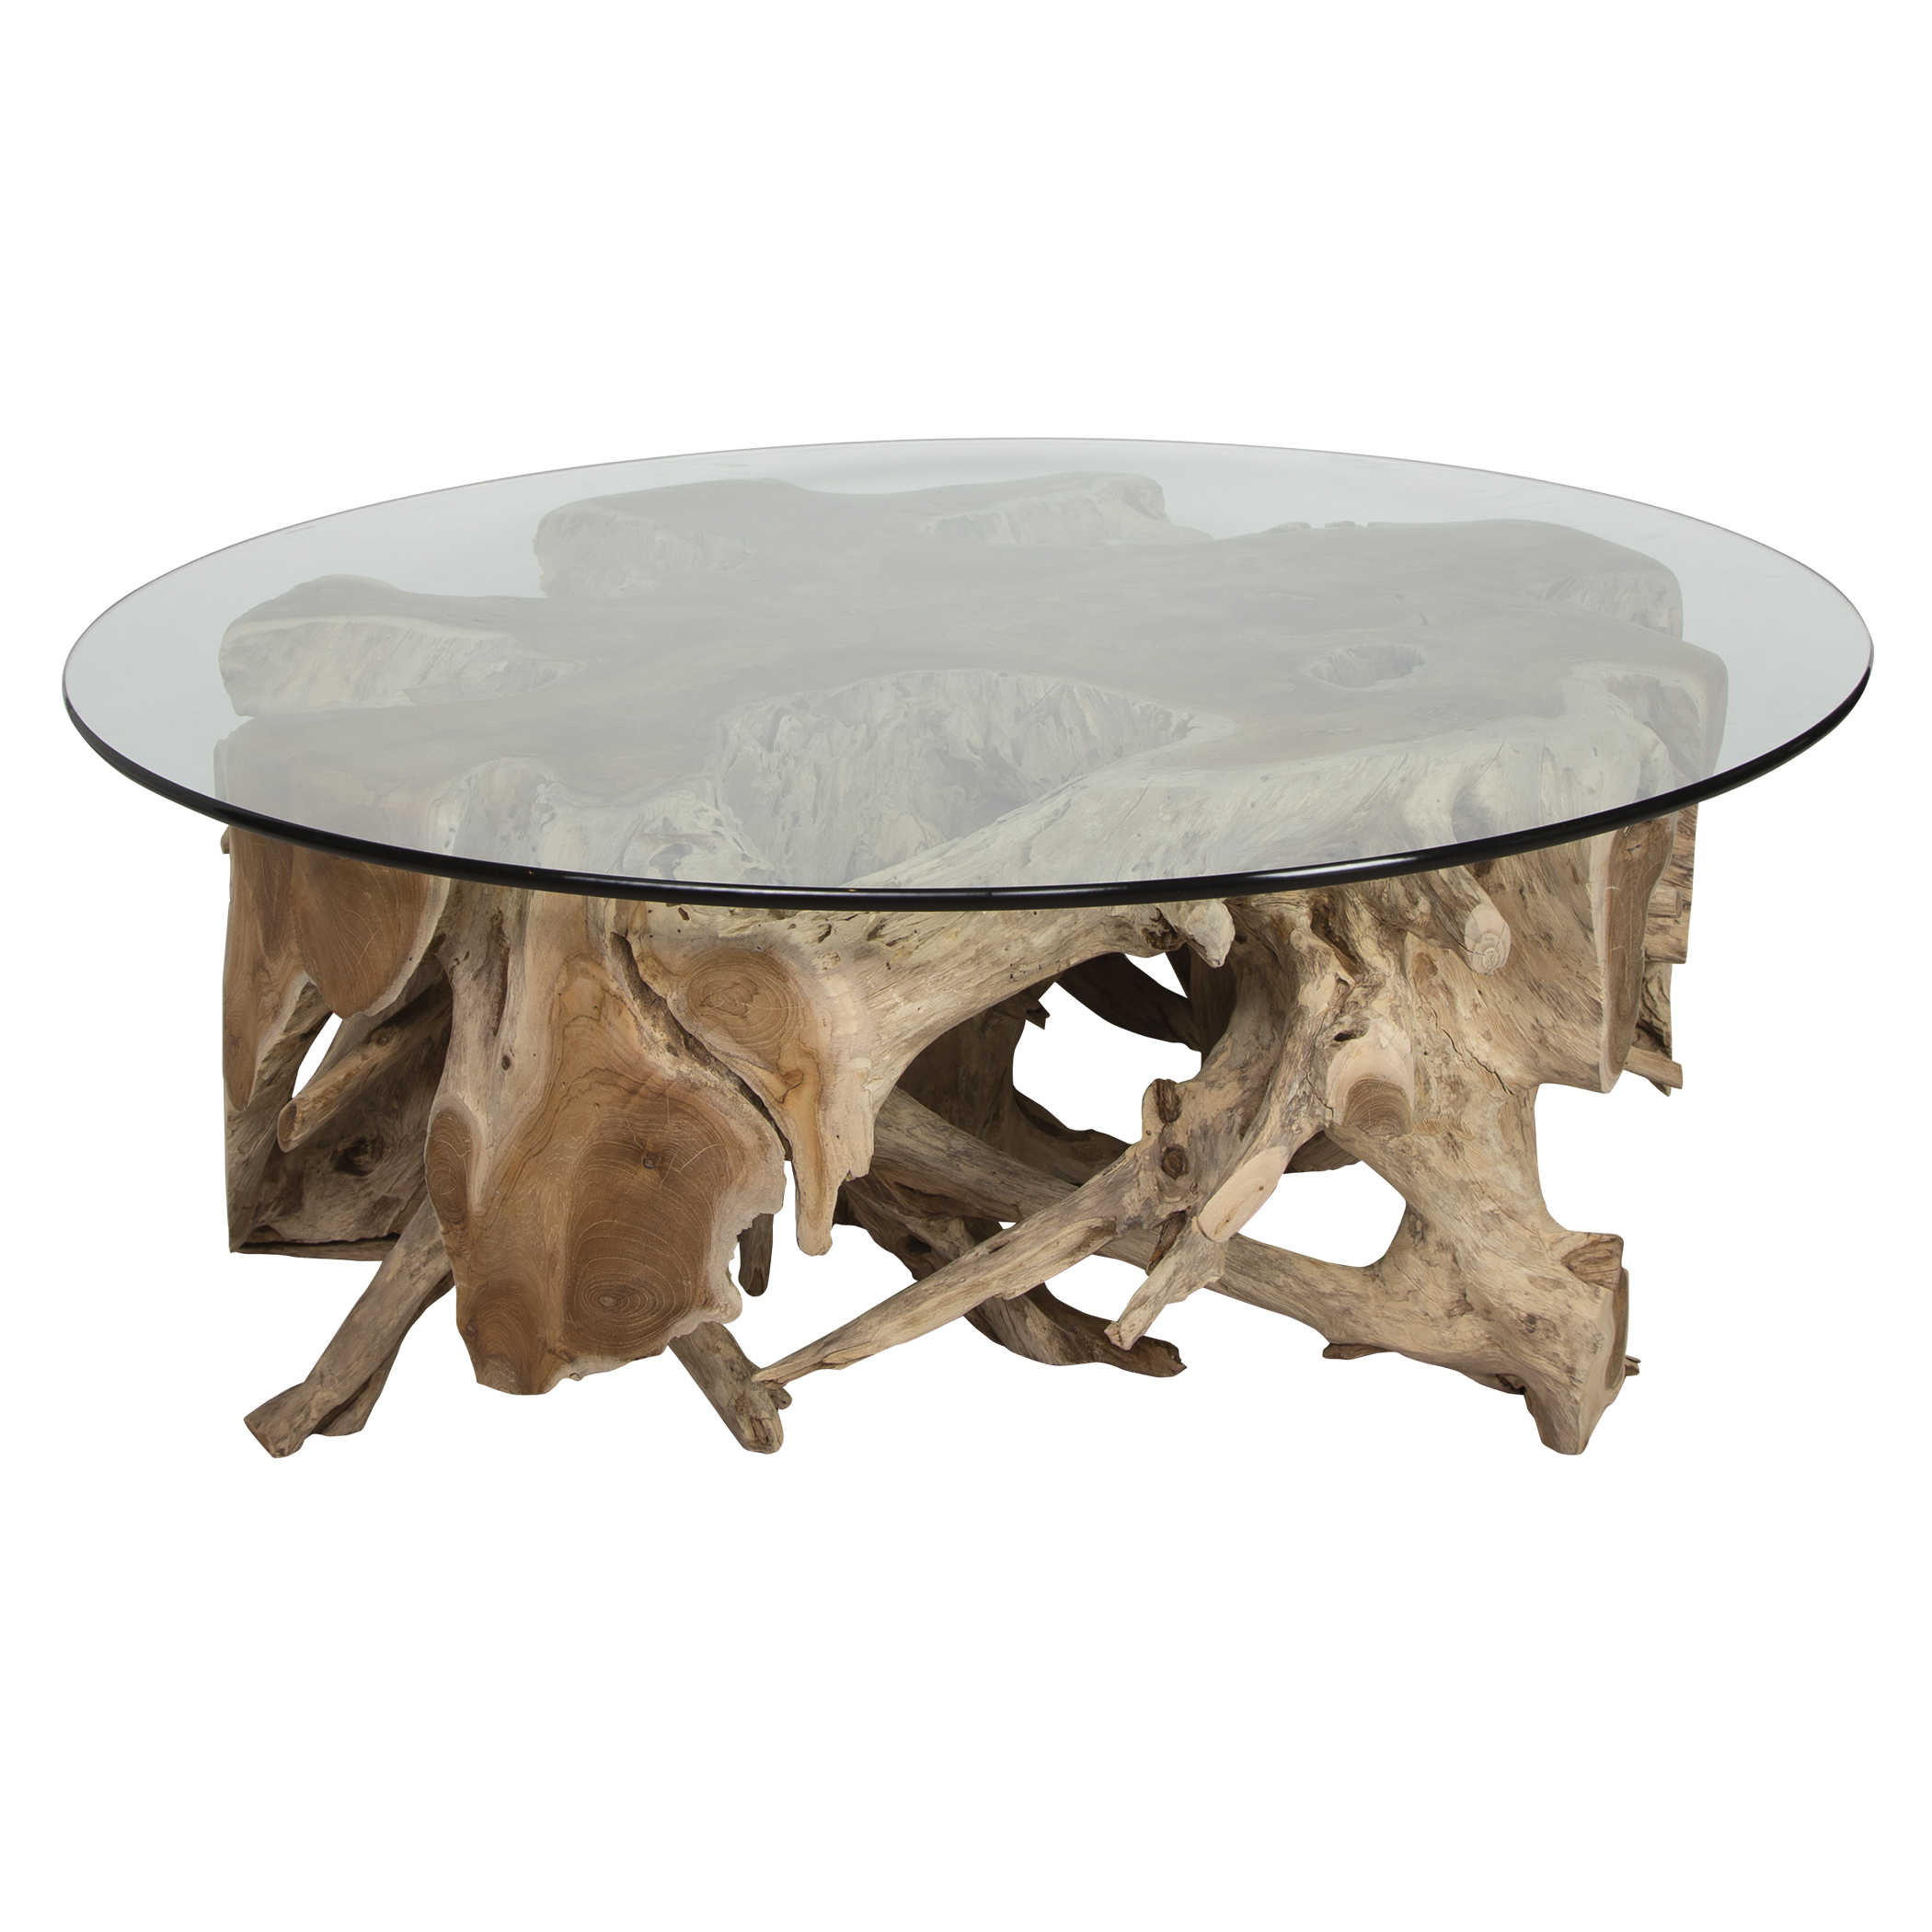 Teak Root Coffee Table, Round 2 CARTONS | Uttermost